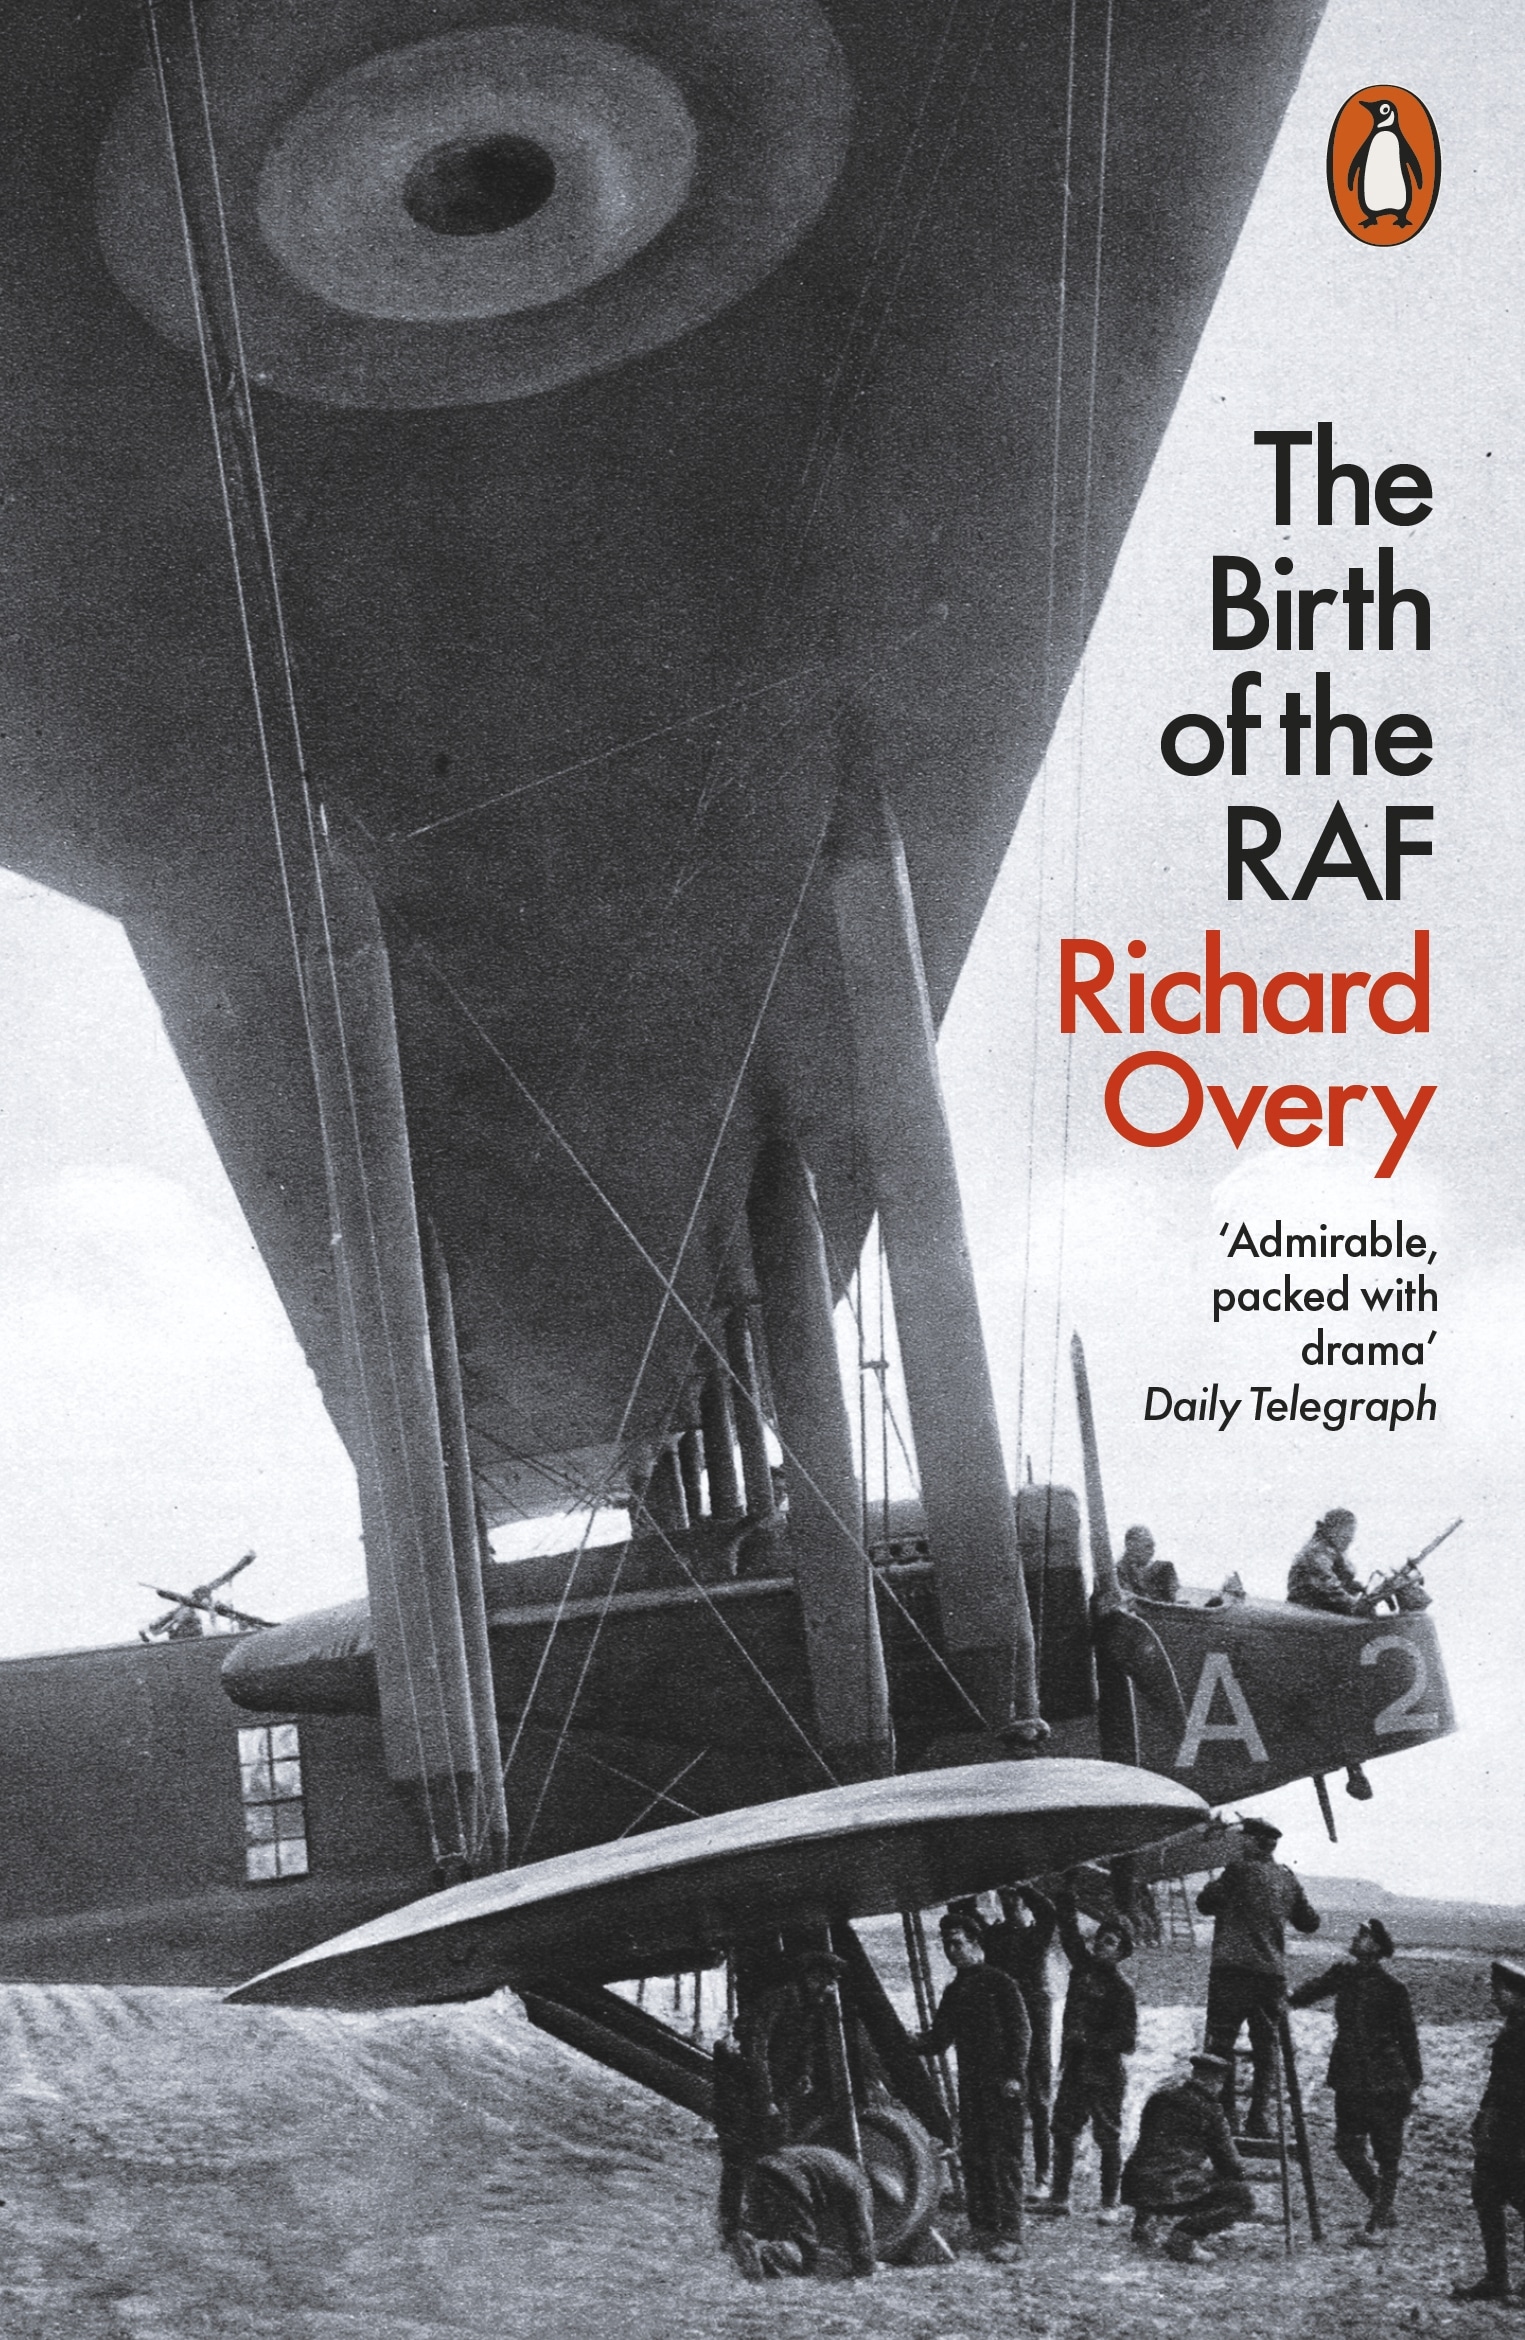 Book “The Birth of the RAF, 1918” by Richard Overy — March 1, 2019